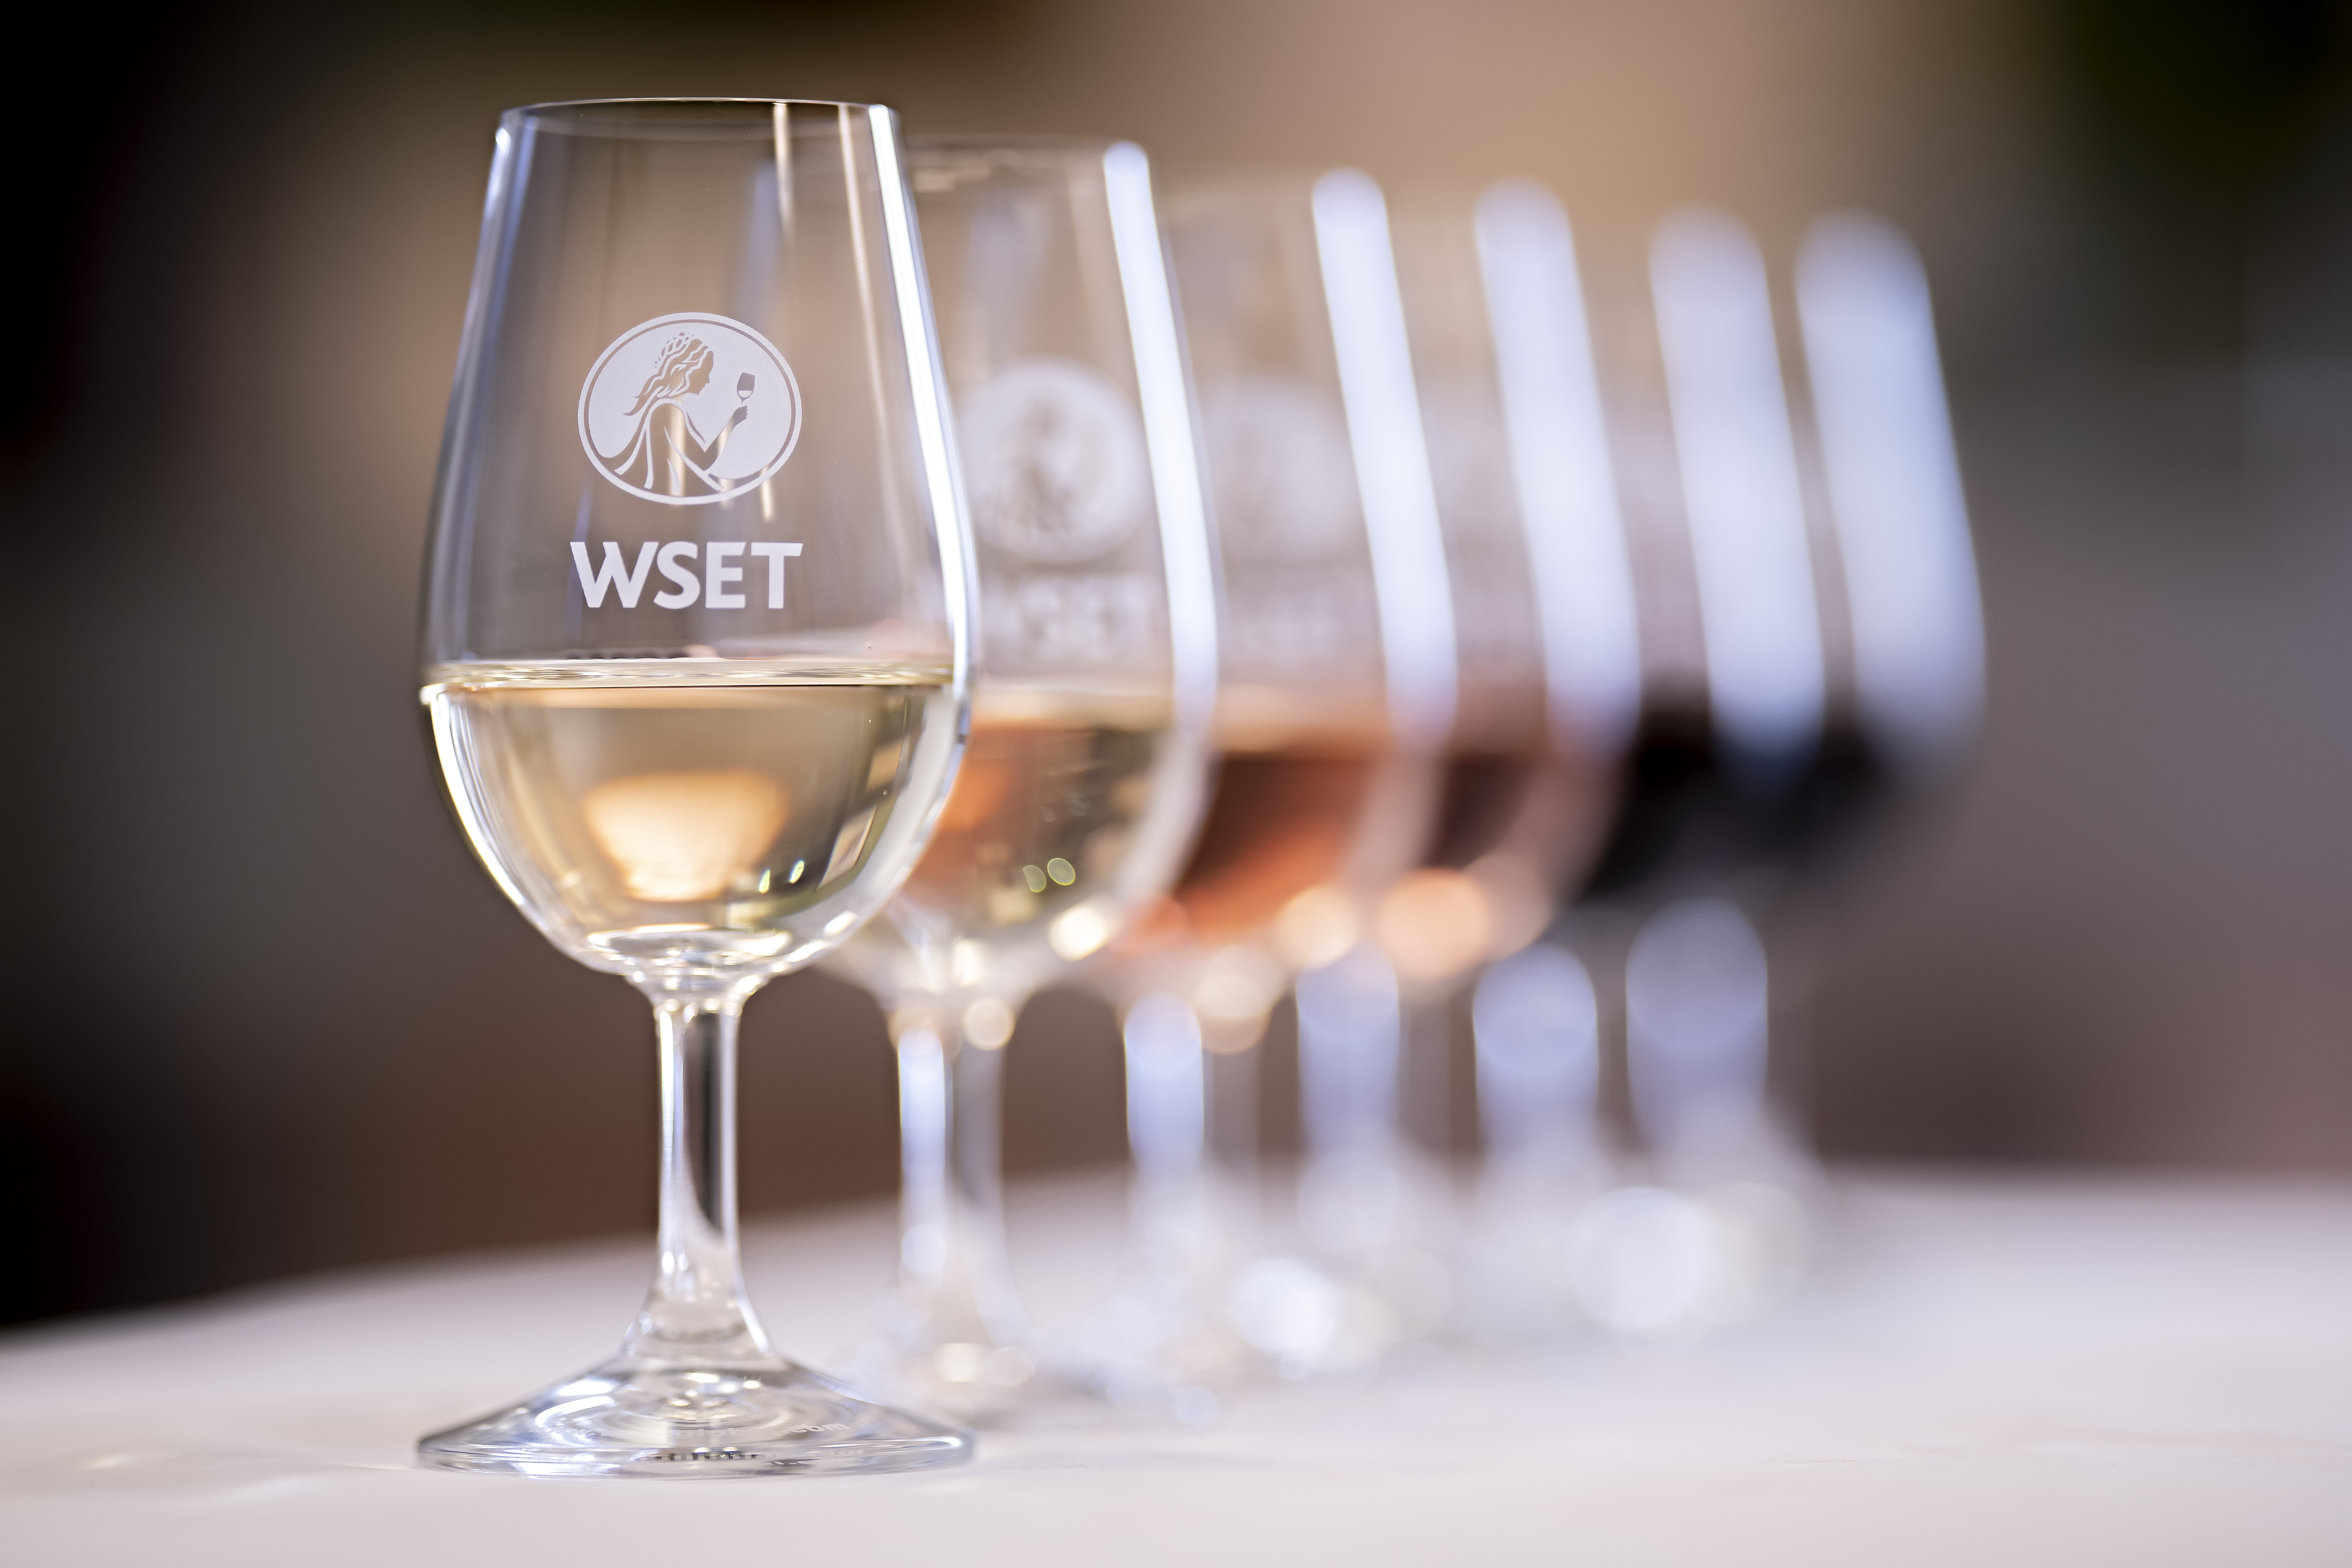 WSET’s Three Minute Wine School email course